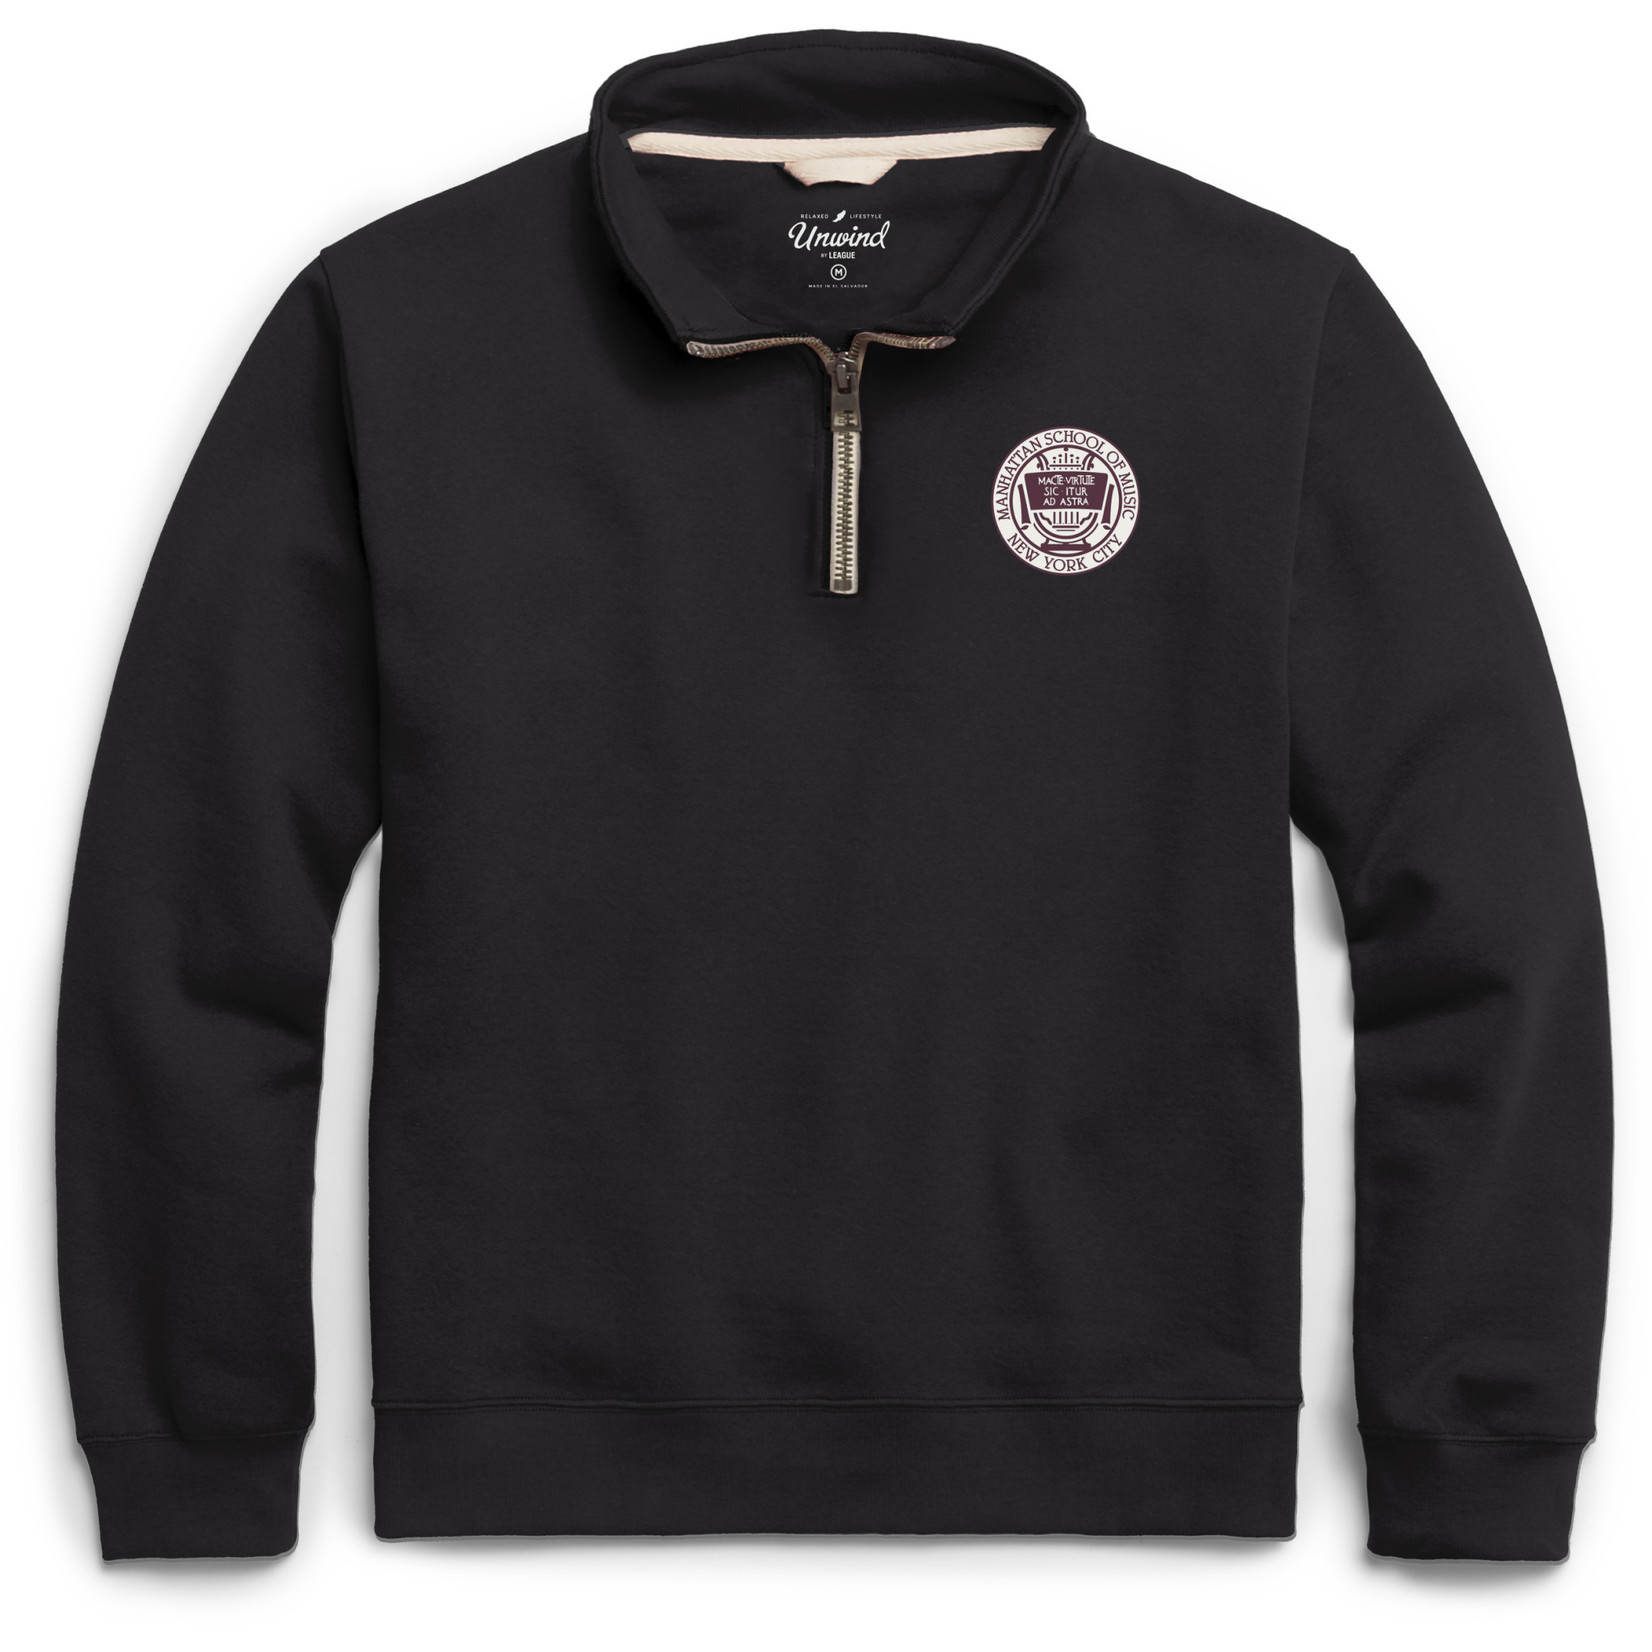 sweatshirt: Essential 1/4 zip League with embroidered seal